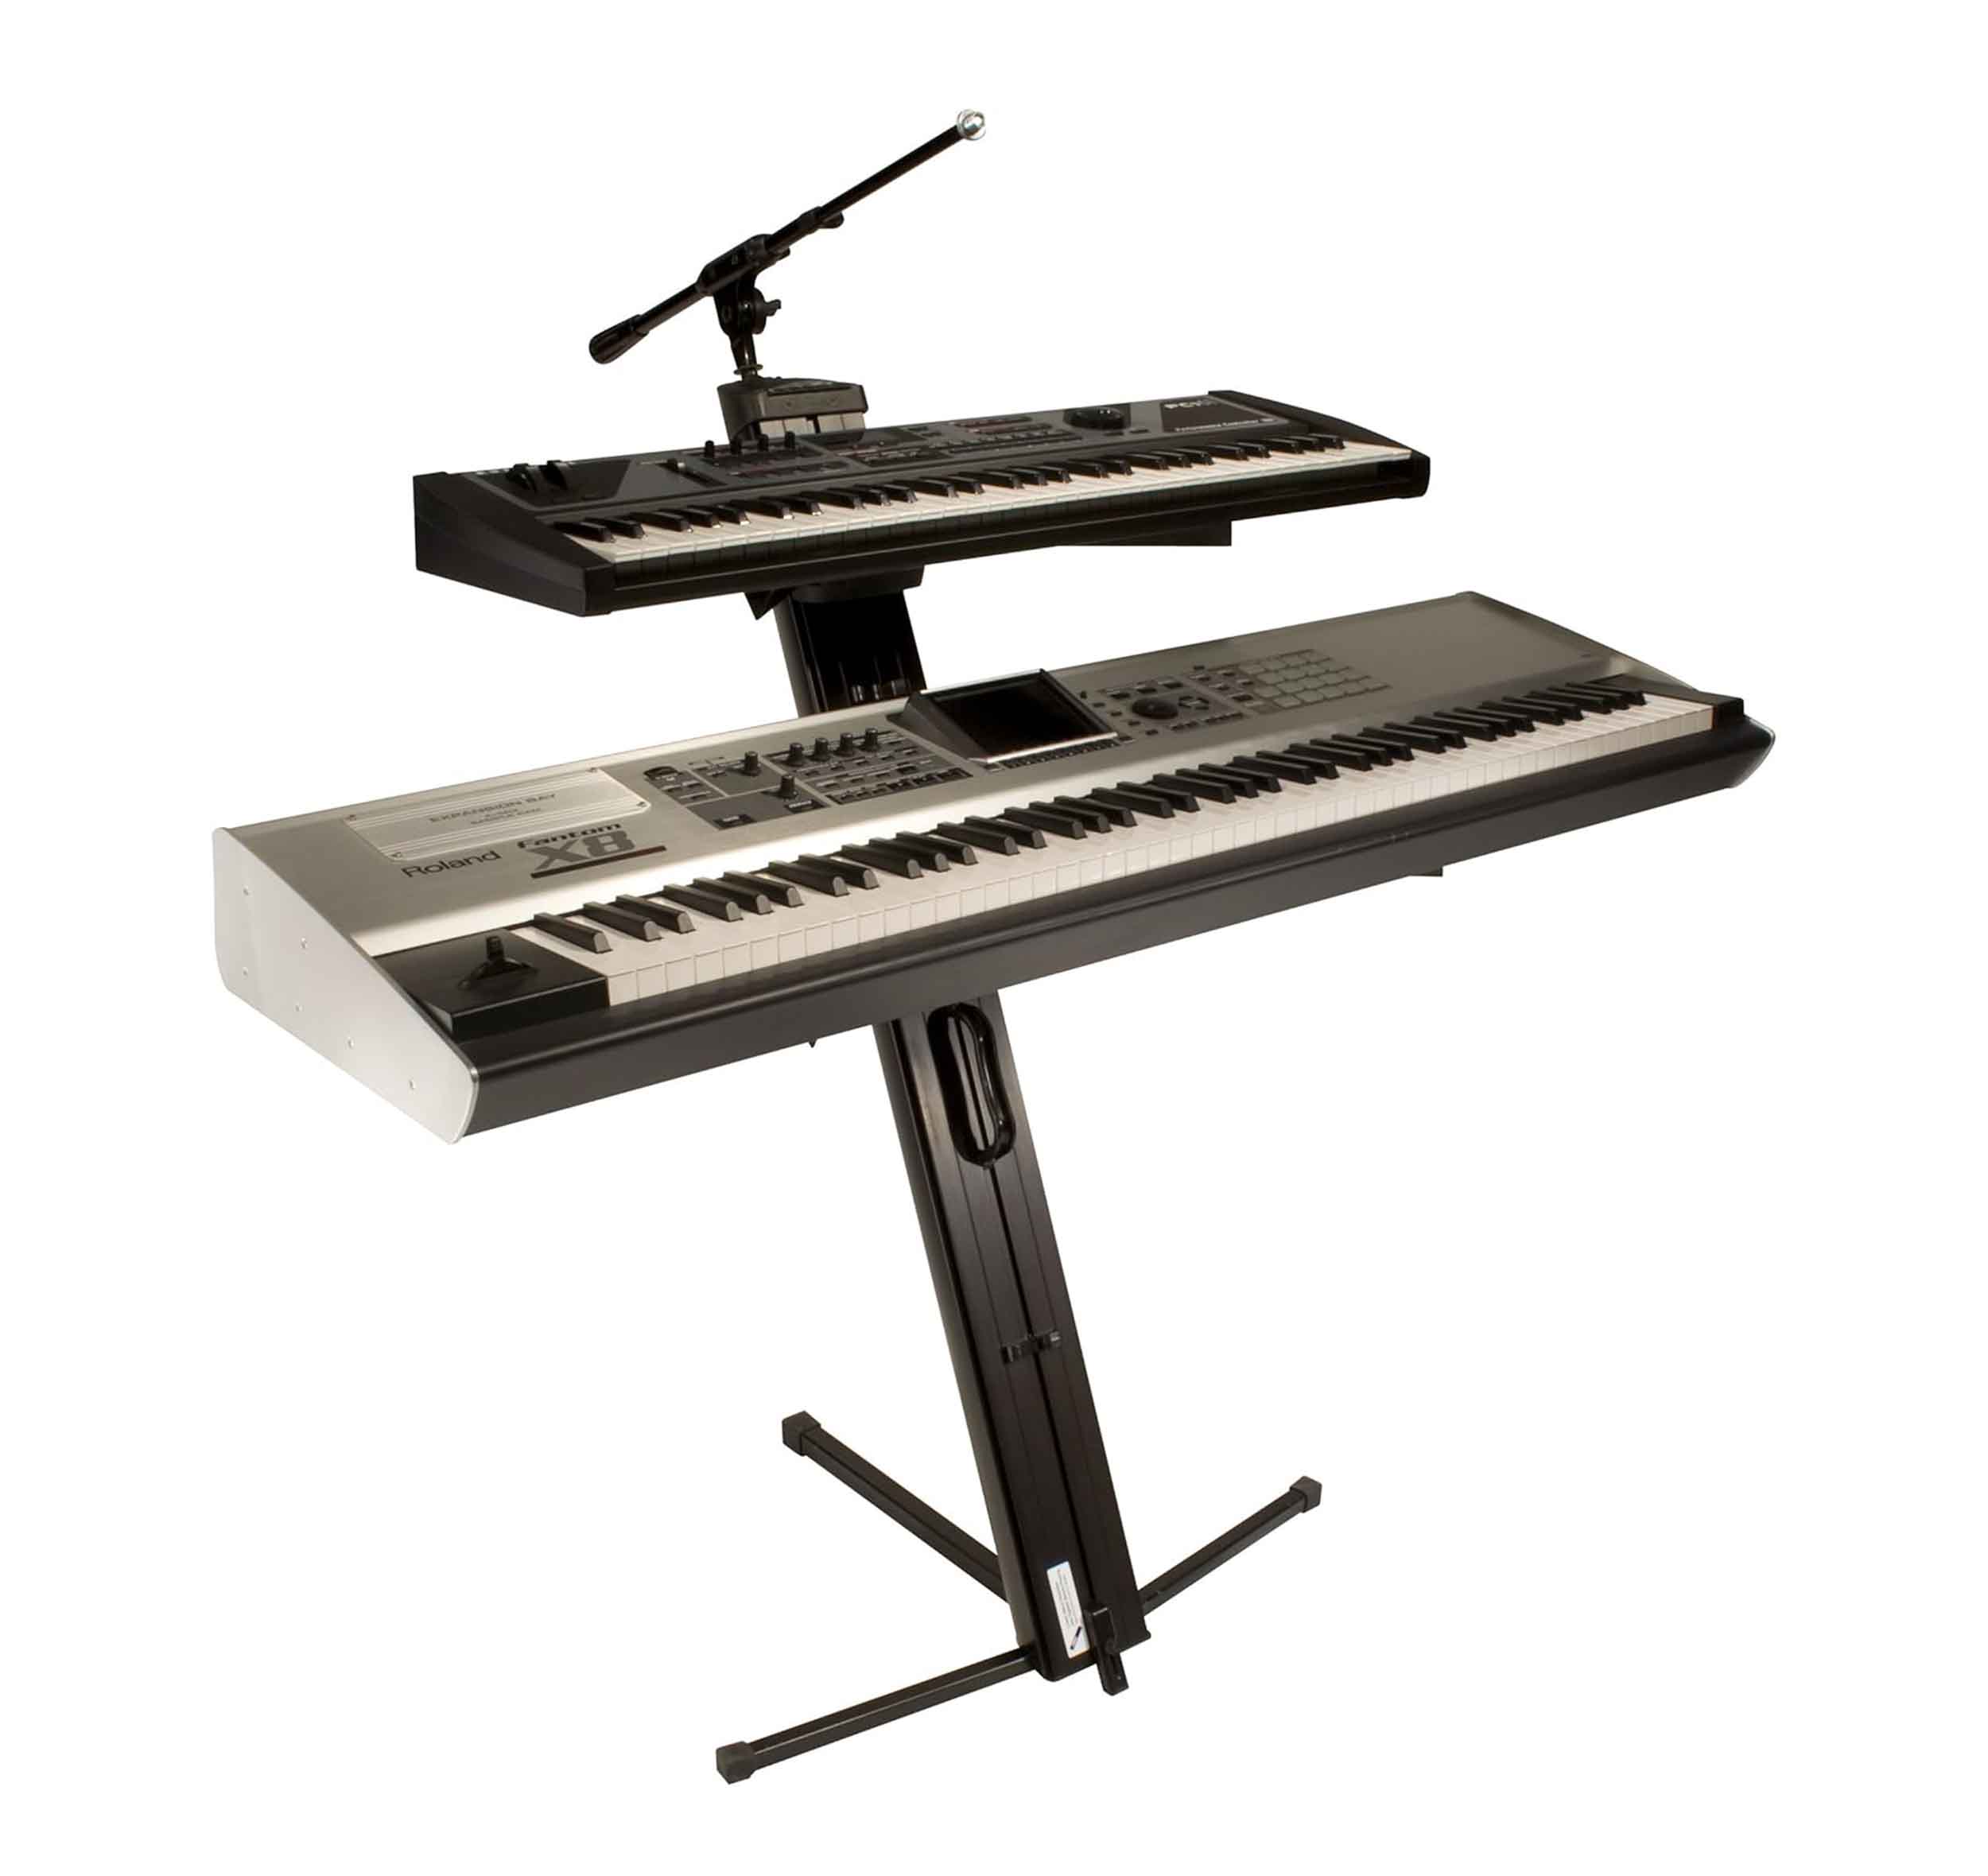 Ultimate Support AX-48PKG Pro Column Keyboard Stand - Black by Ultimate Support